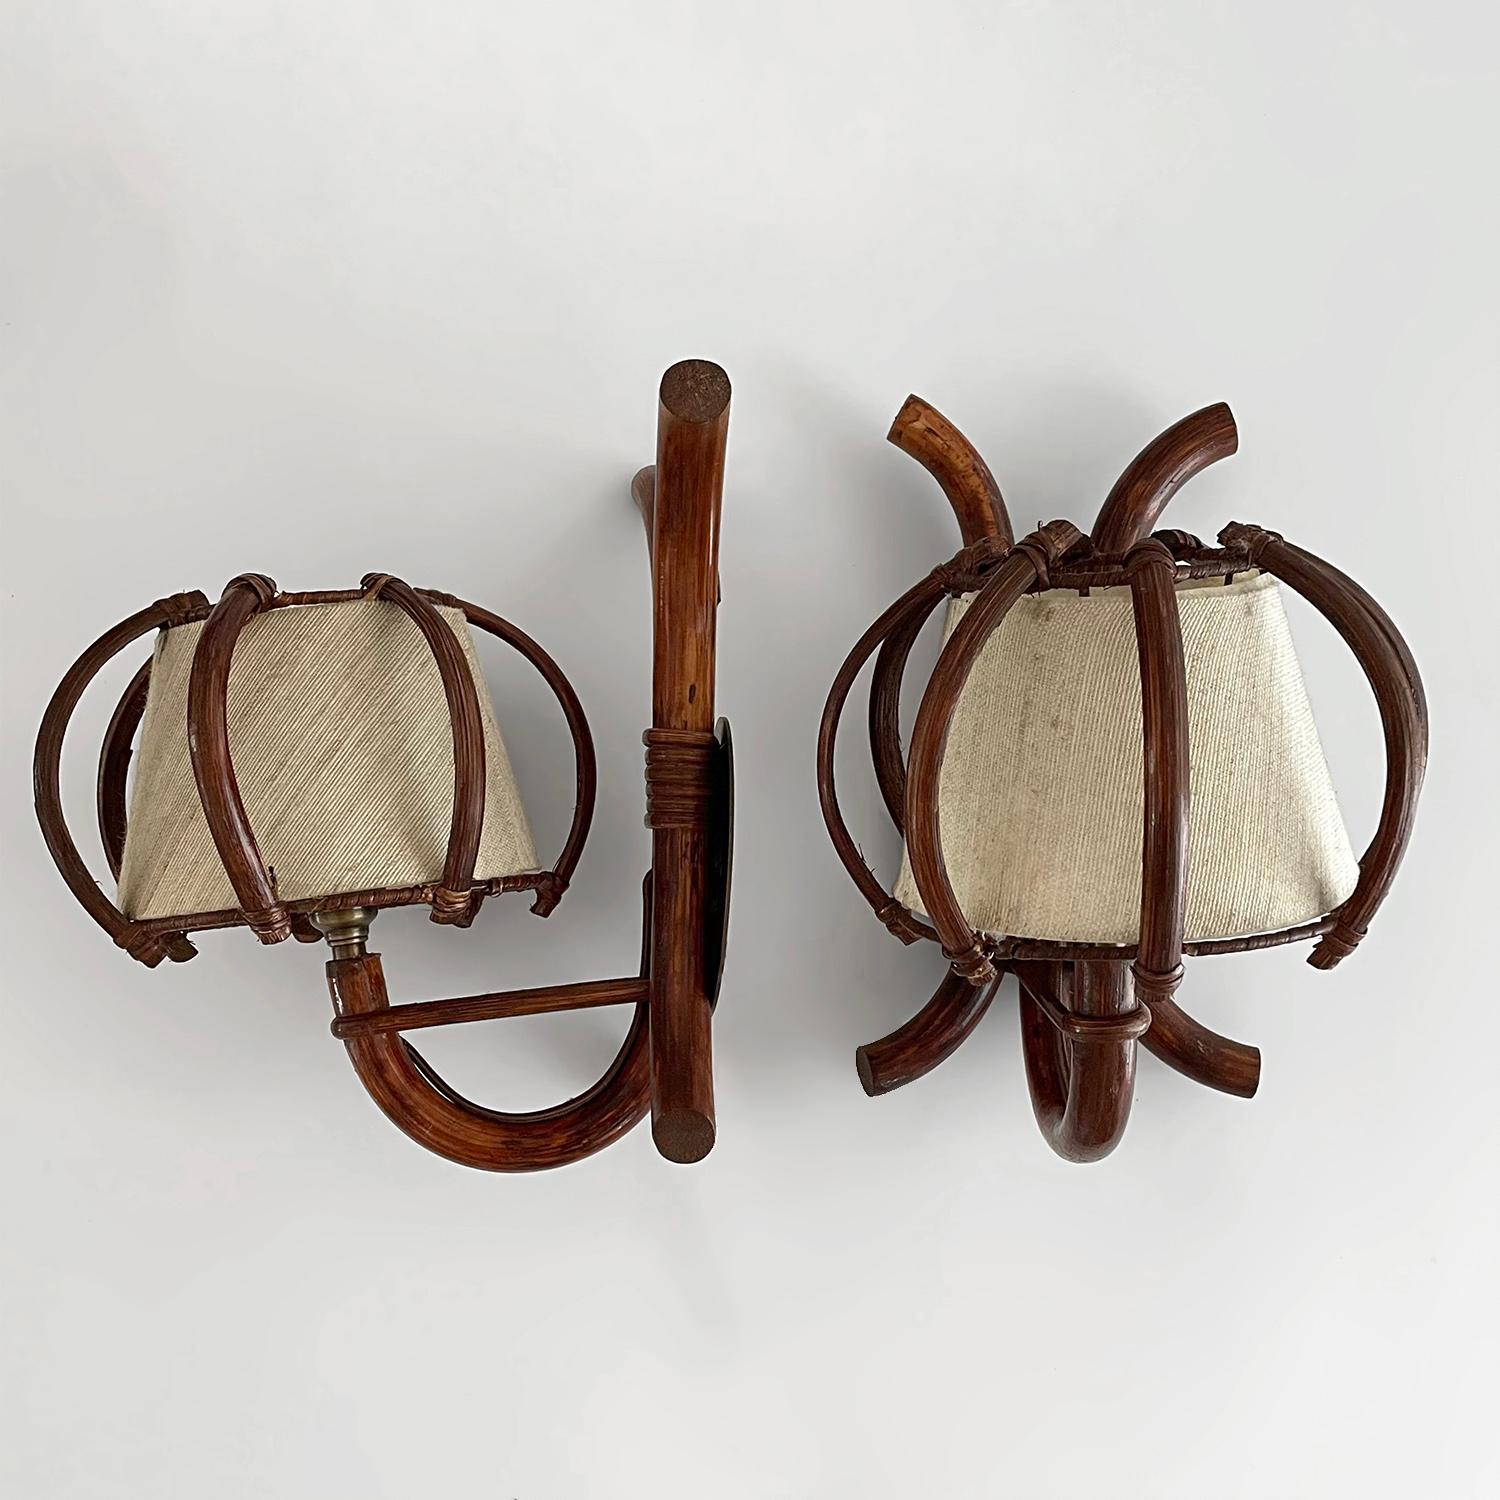 Pair of Louis Sognot arched bamboo sconces
France, circa 1960s
Each lamp is unique in its organic composition and feel 
Sculpted bamboo wall mounted backpiece includes new aged brass backplates
Beautifully sculpted bamboo arches are the centerpiece